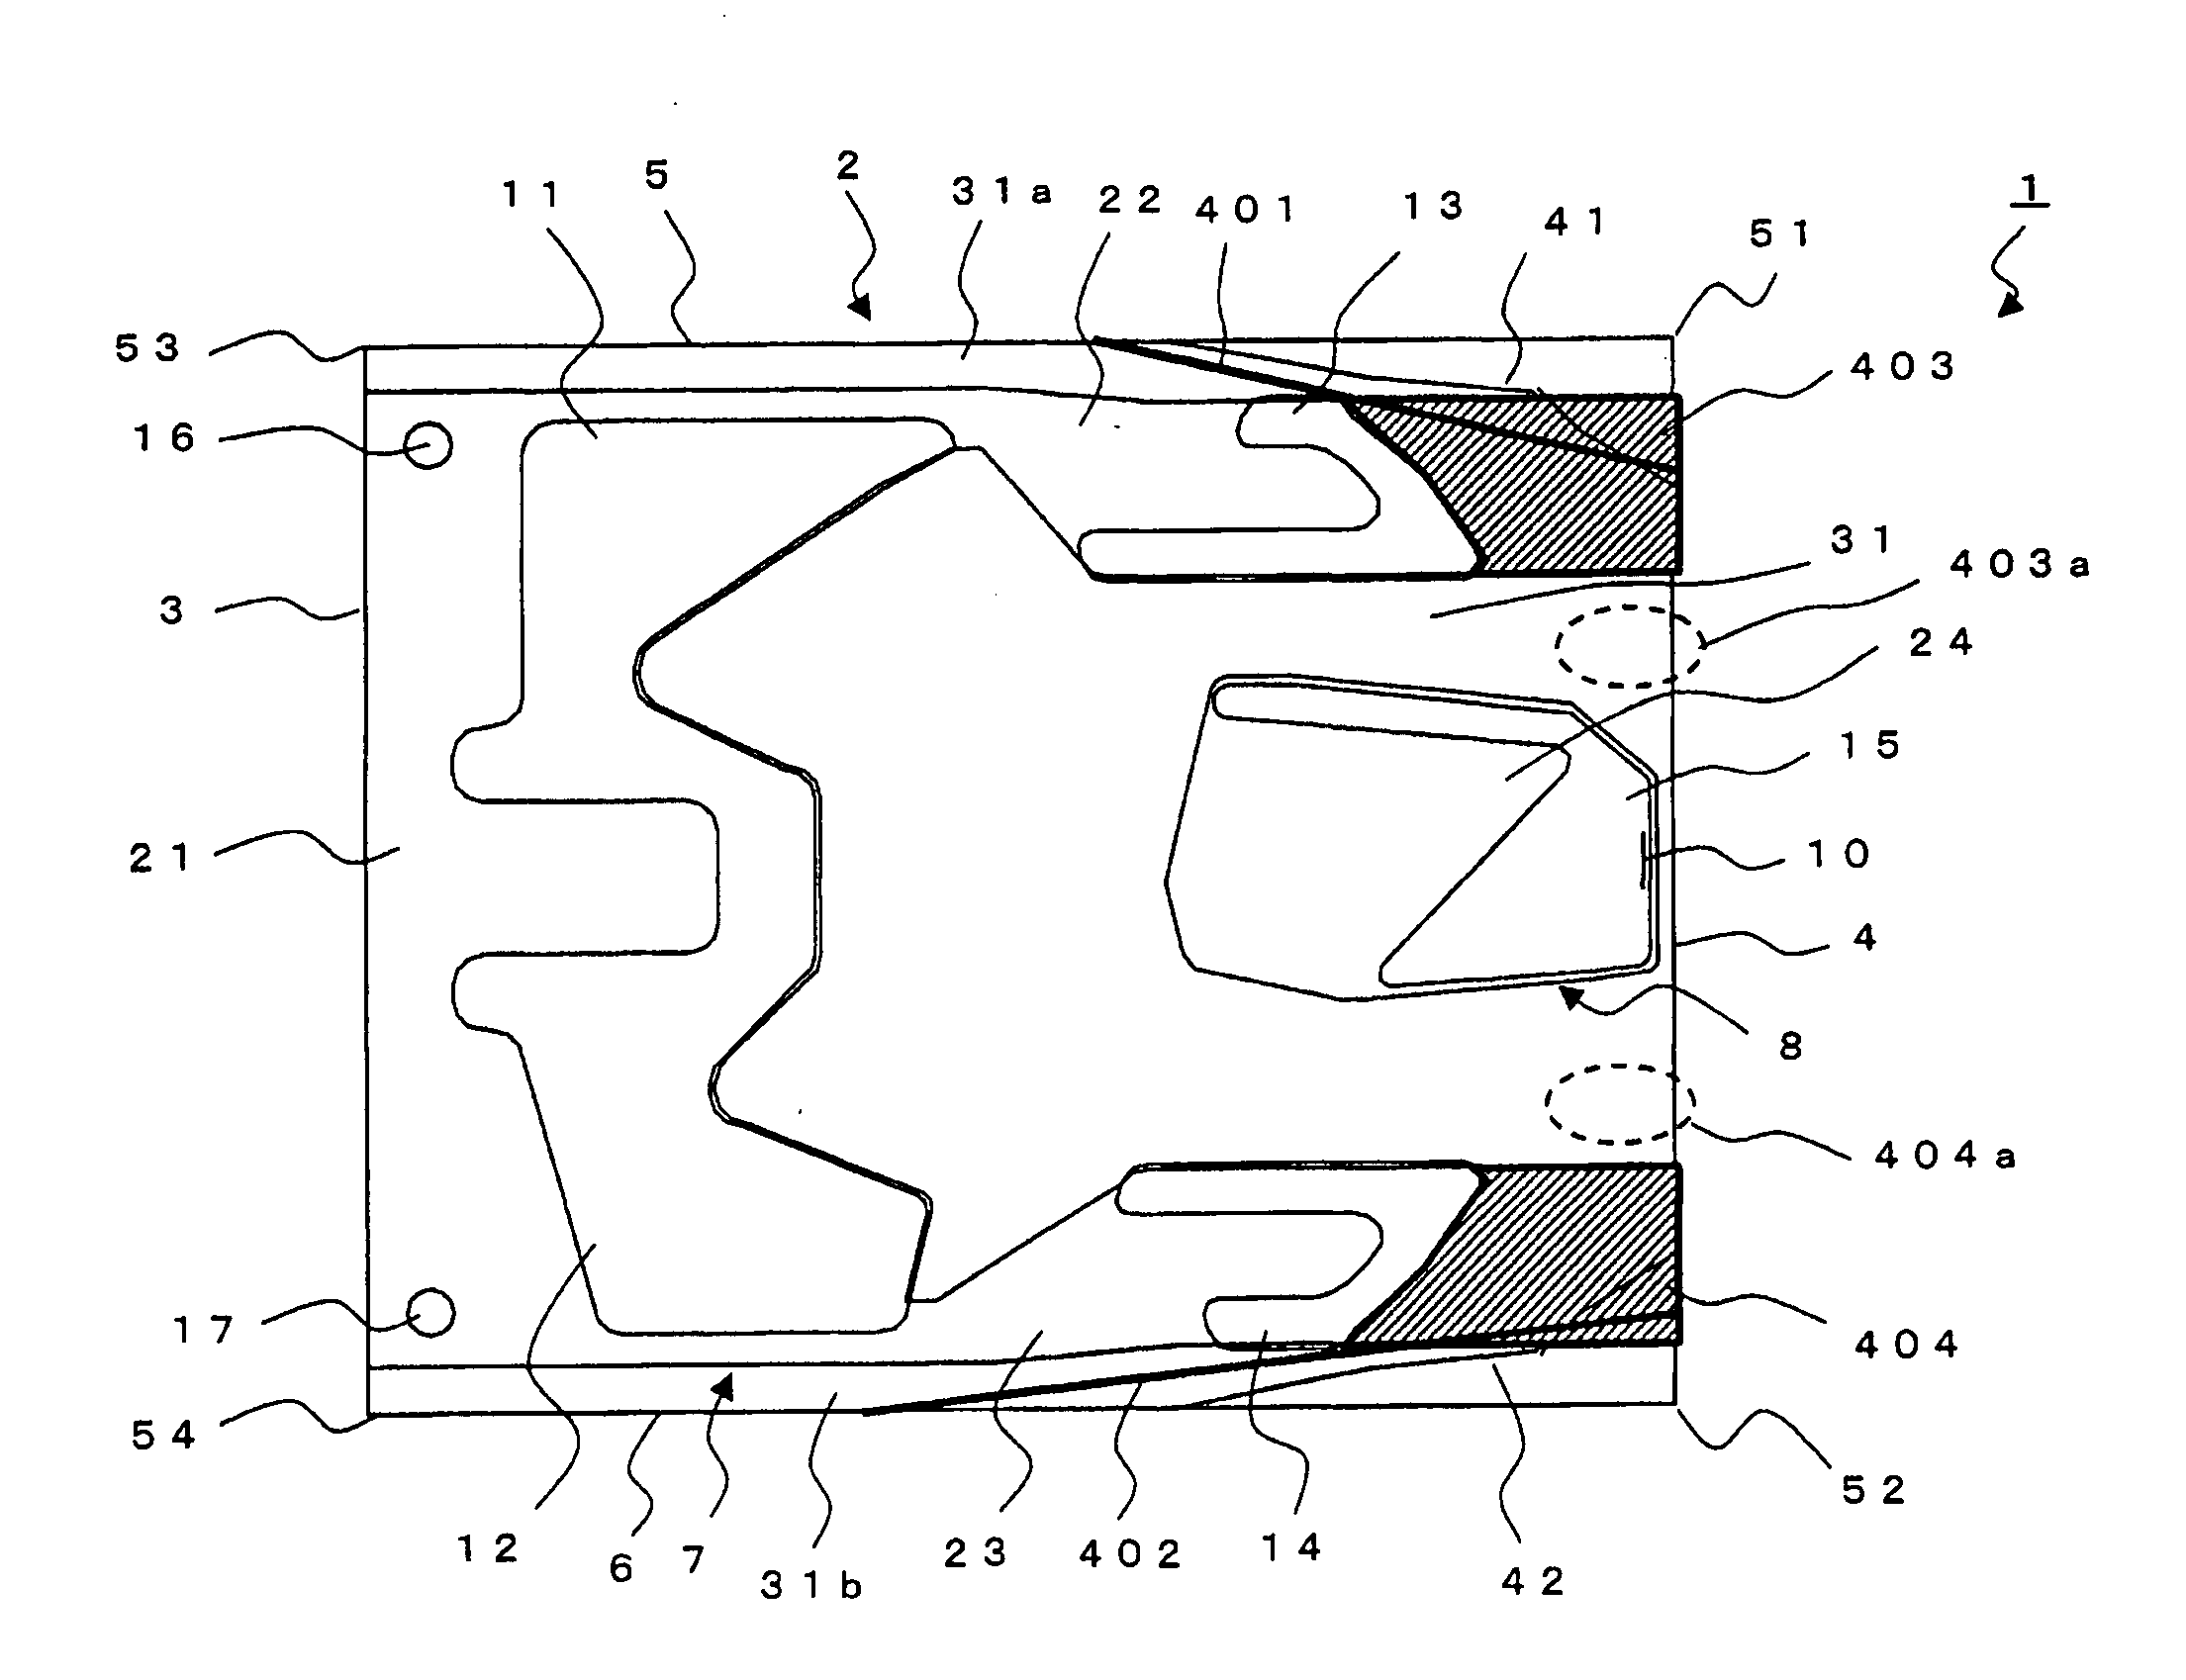 Magnetic disk drive with air bearing surface design for data area expansion